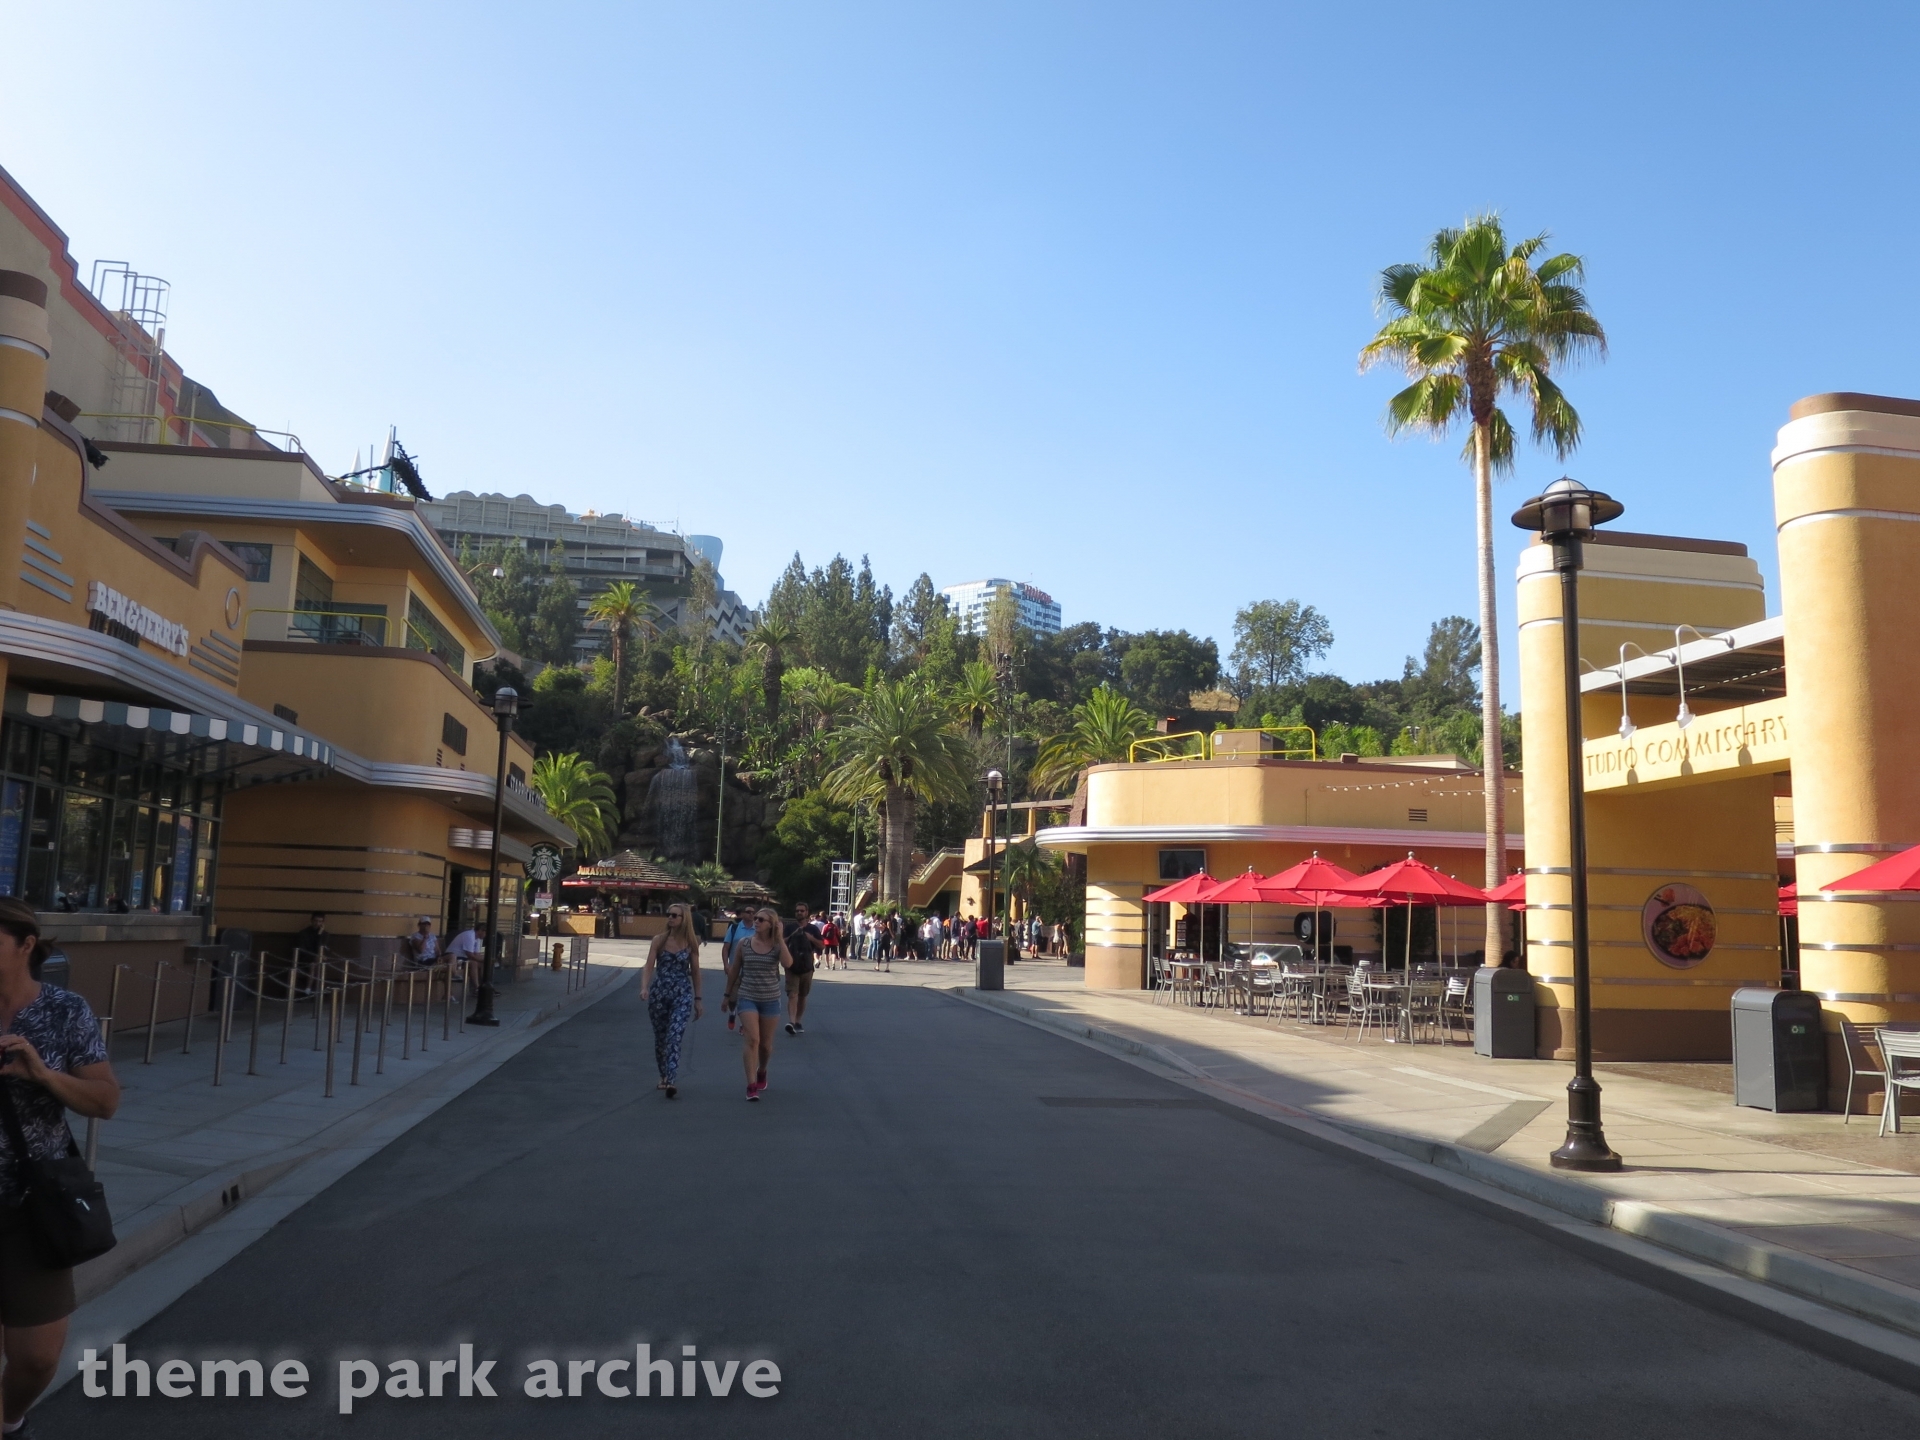 Lower Lot at Universal Studios Hollywood Theme Park Archive